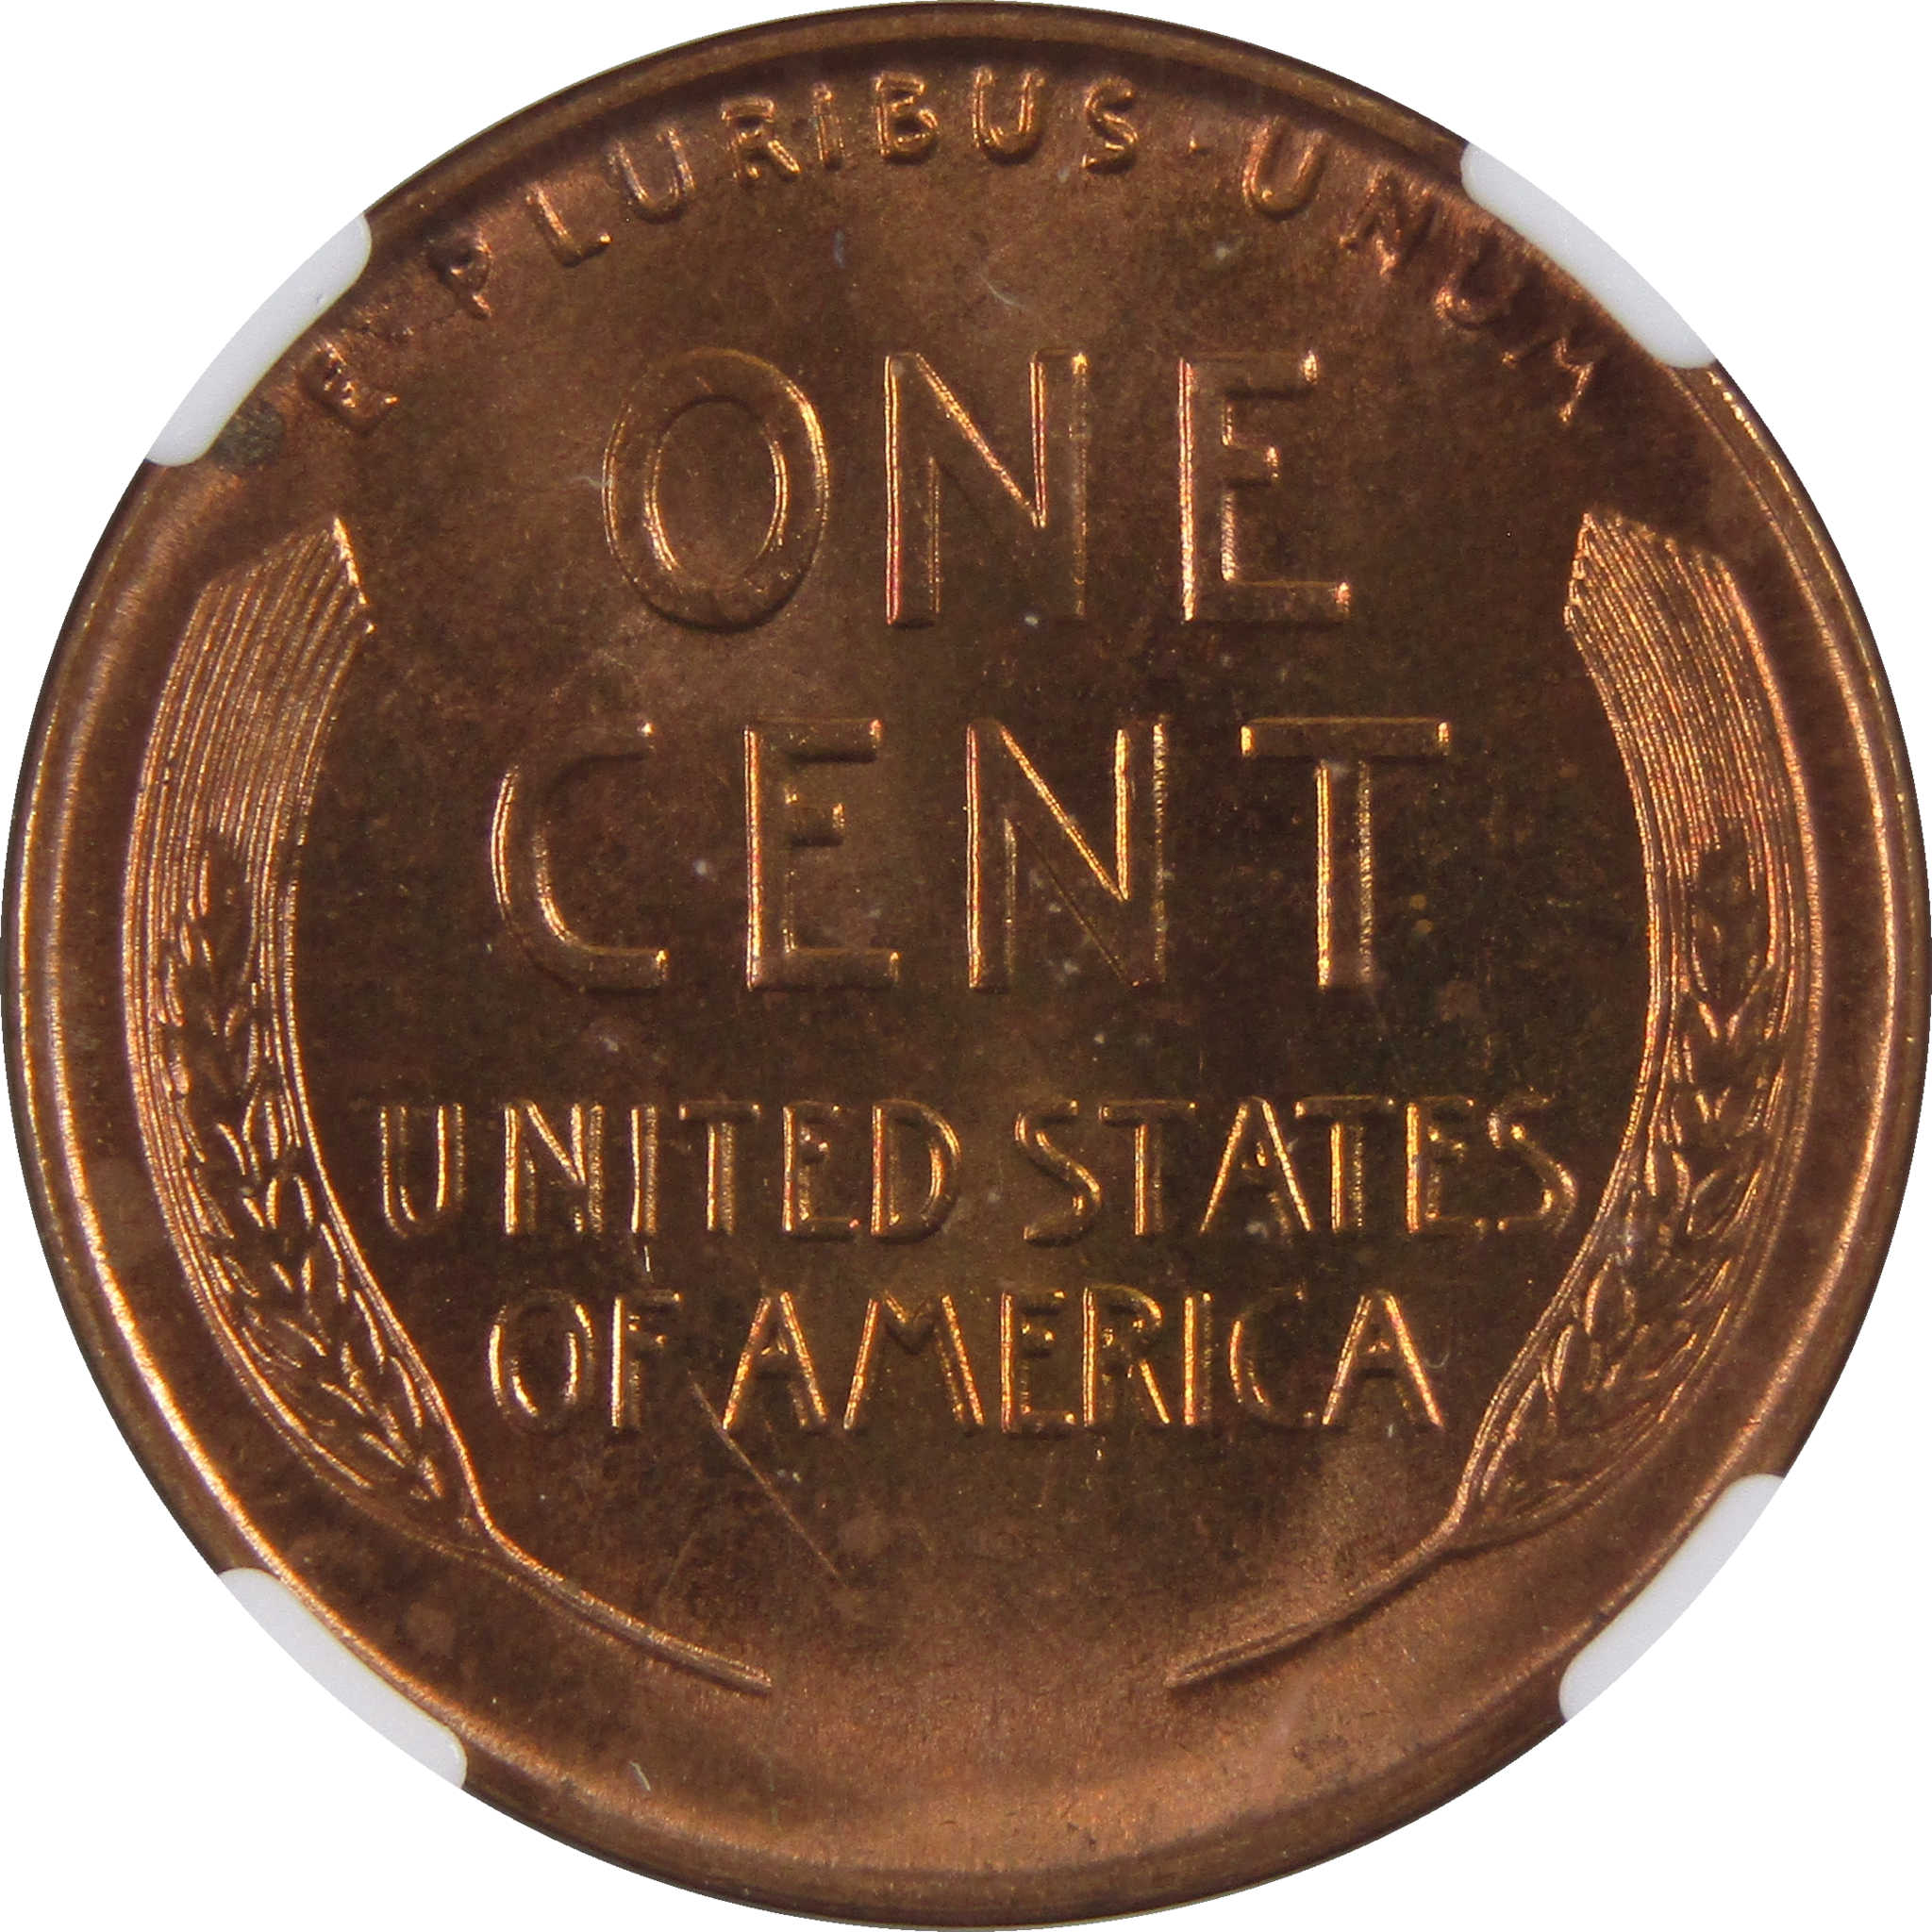 1940 D Lincoln Wheat Cent MS 67 RD NGC Penny 1c Uncirculated SKU:I3154